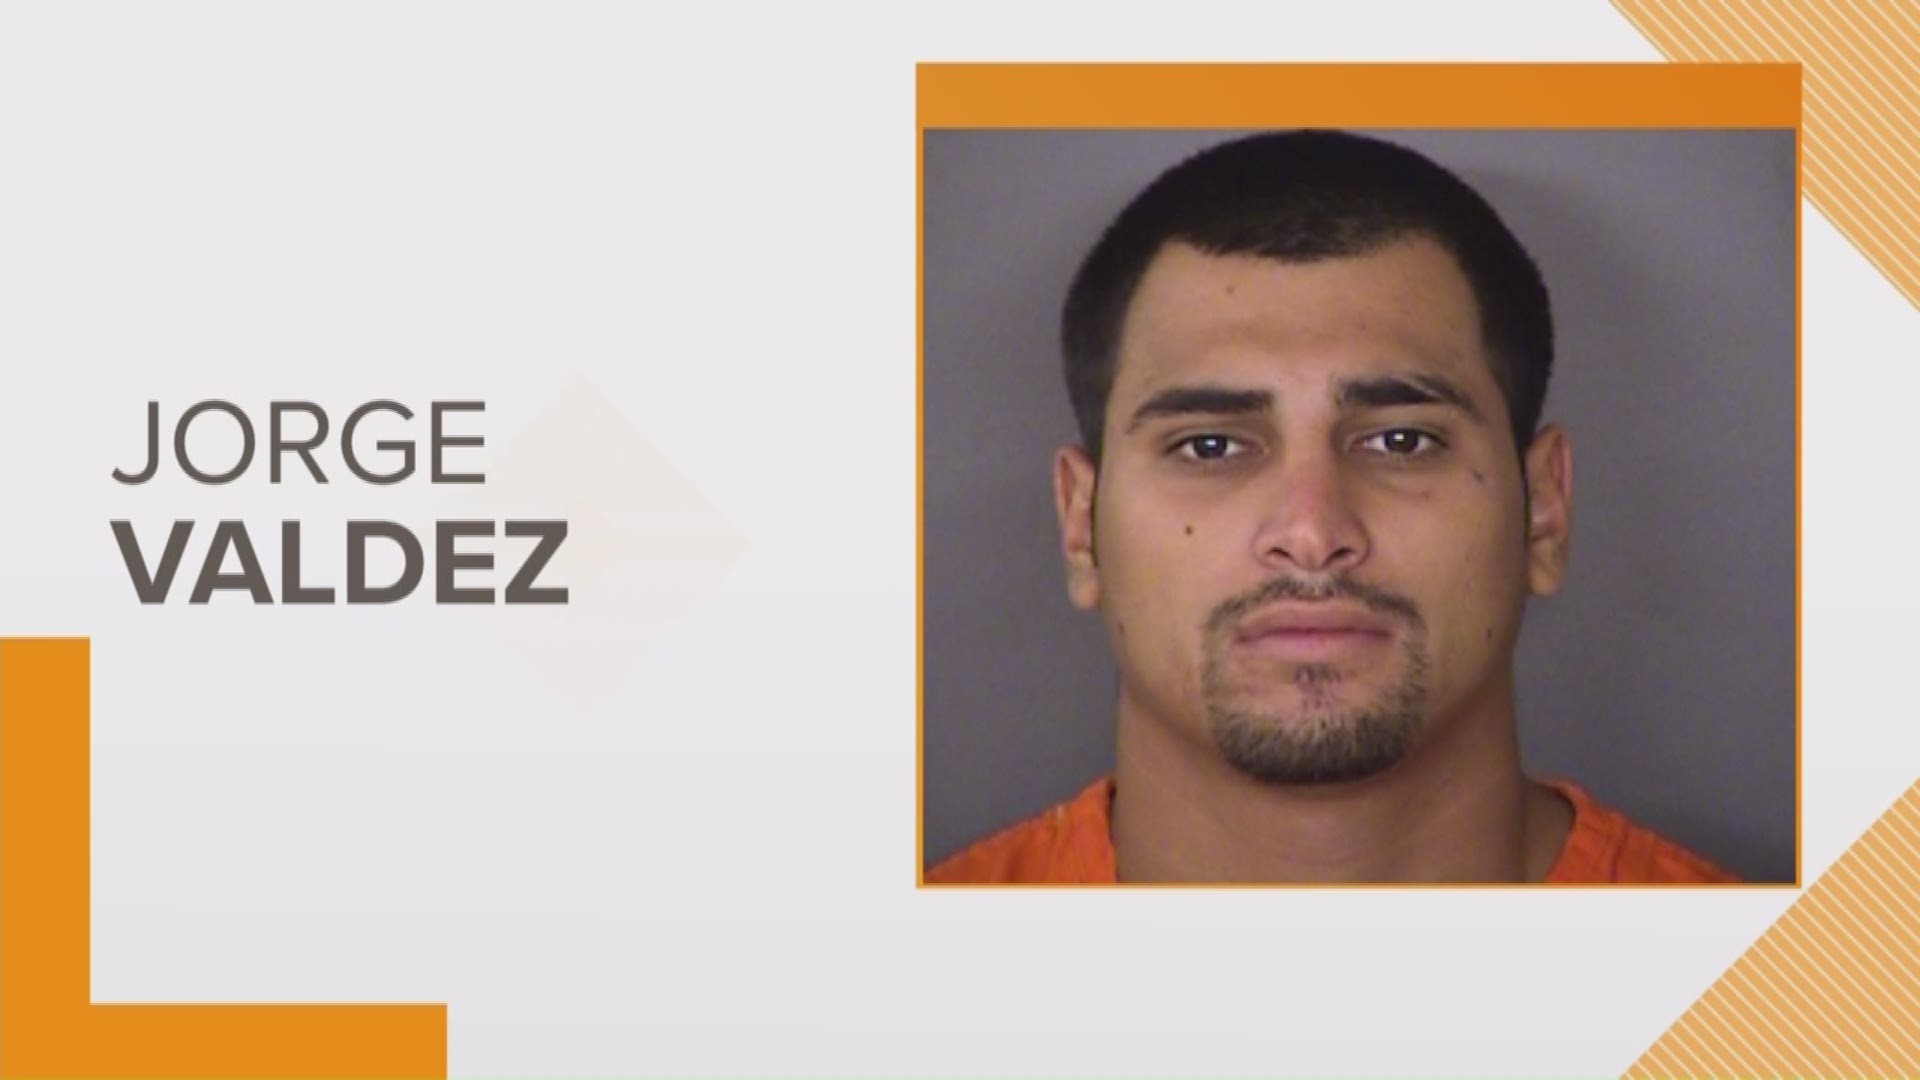 The driver police say is responsible for fatally hitting a woman while she was crossing the street  Wednesday night has been arrested thanks to witnesses who followed him, according to the San Antonio Police Department.